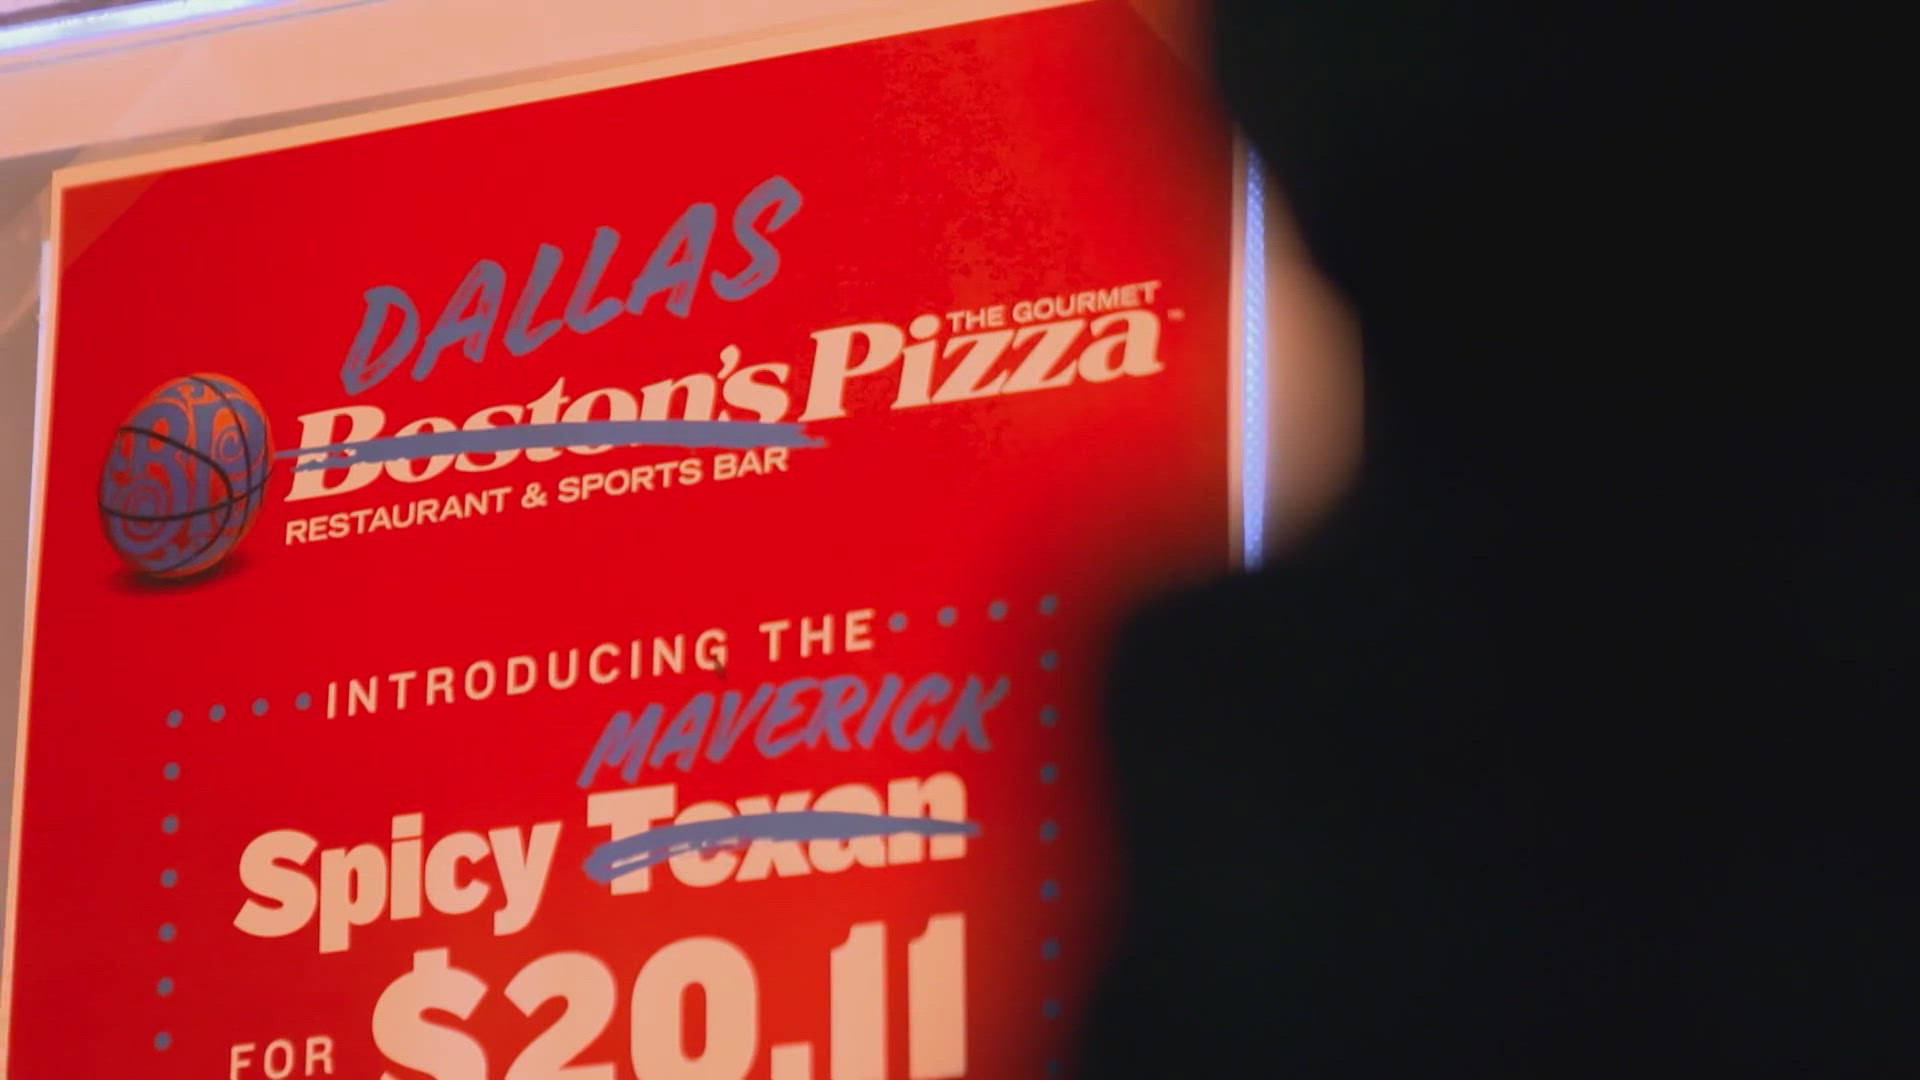 The chain known as "Boston's Pizza" is now called "Dallas Pizza" for the rest of the finals.